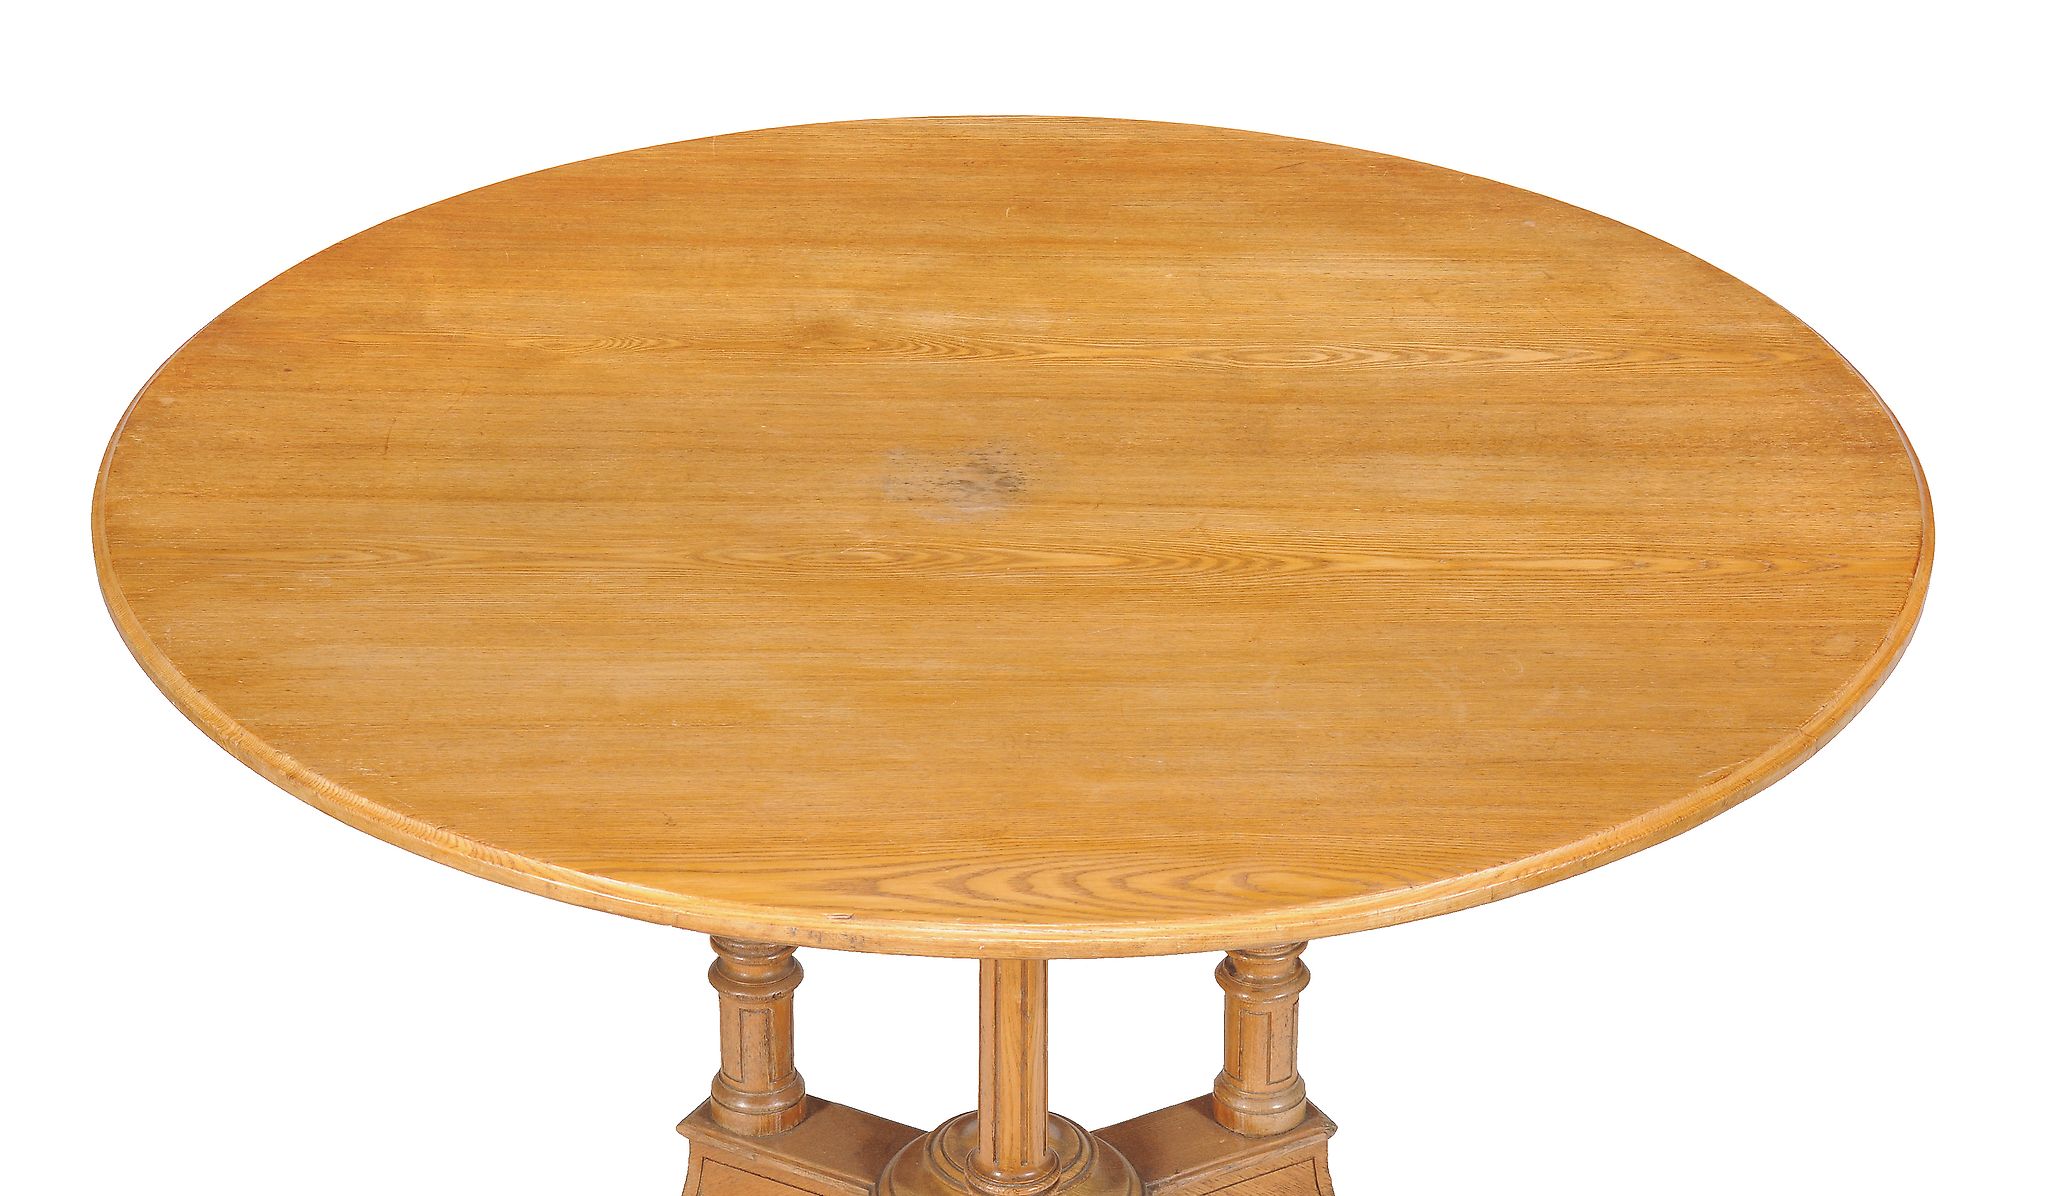 A Victorian ash circular centre table , circa 1860, attributed to Gillows, with fluted supports - Image 2 of 2